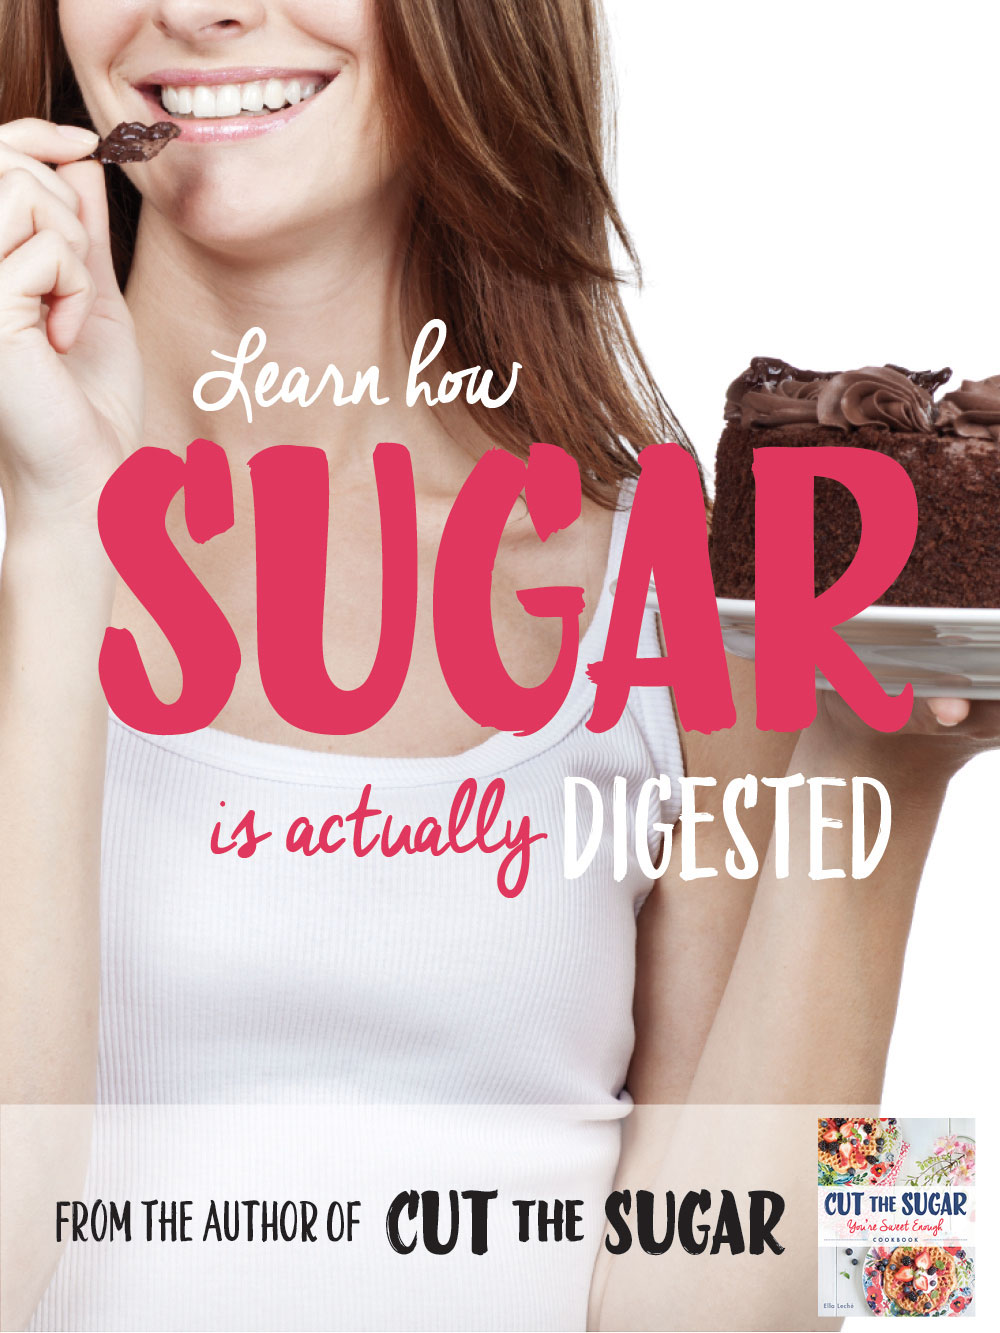 Learn-how-sugar-is-actually-digested